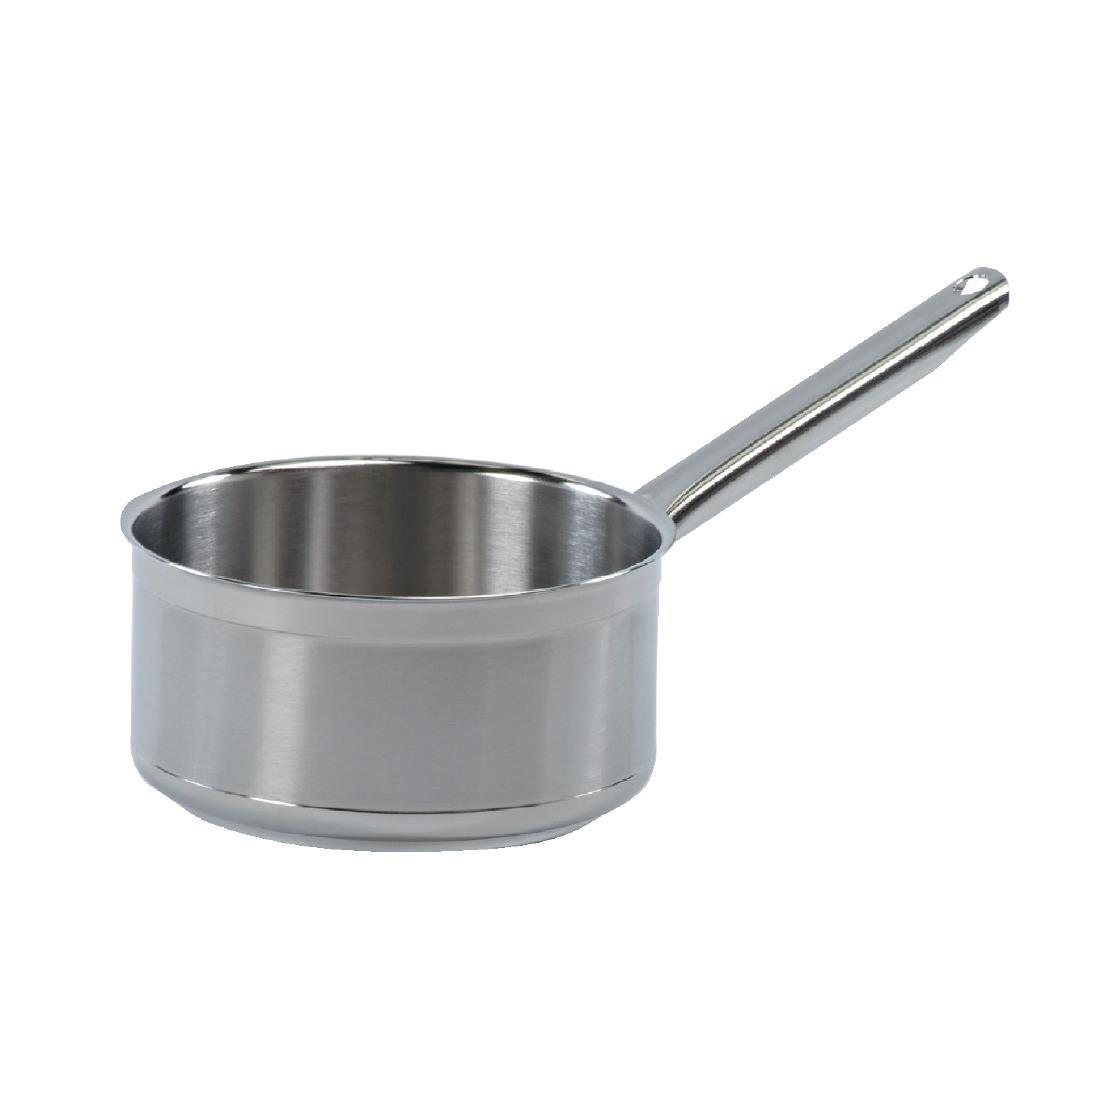 Matfer Bourgeat Tradition Plus Stainless Steel Saucepan 5.4Ltr - L234  - 1